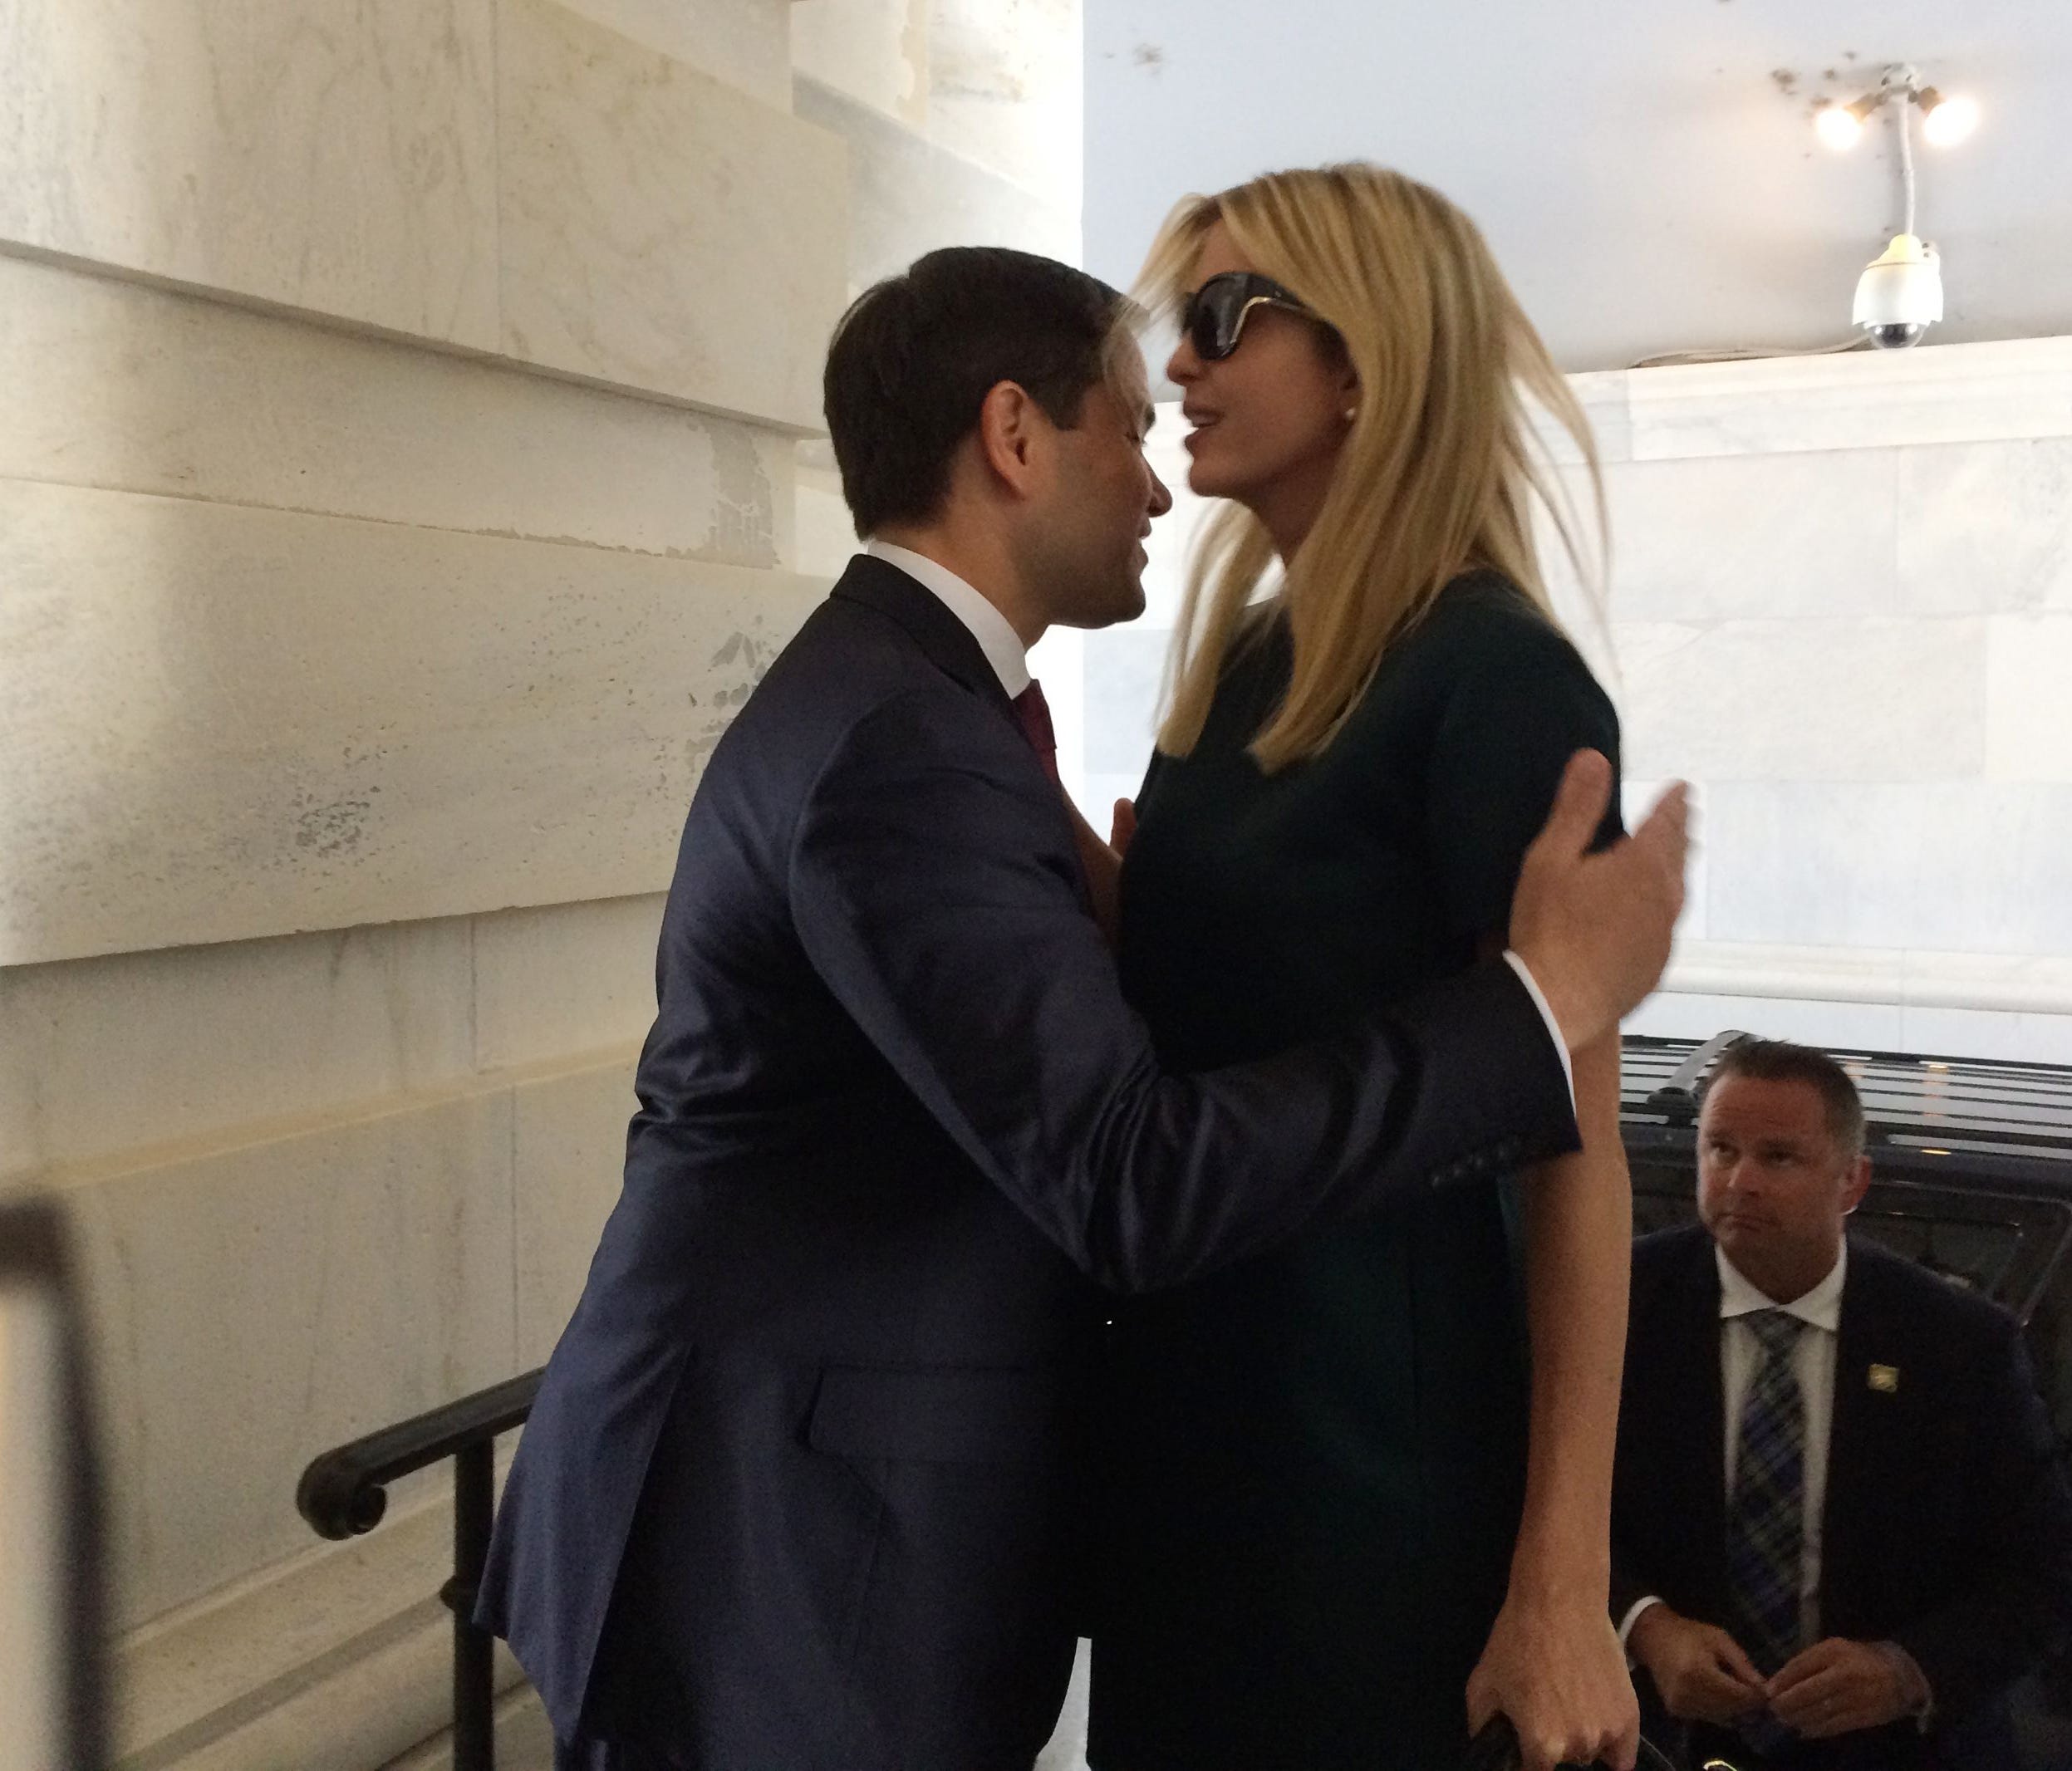 Ivanka Trump, daughter of President Trump, is greeted by Sen. Marco Rubio, R-Fla., as she arrives at the Capitol to meet with lawmakers about parental leave.